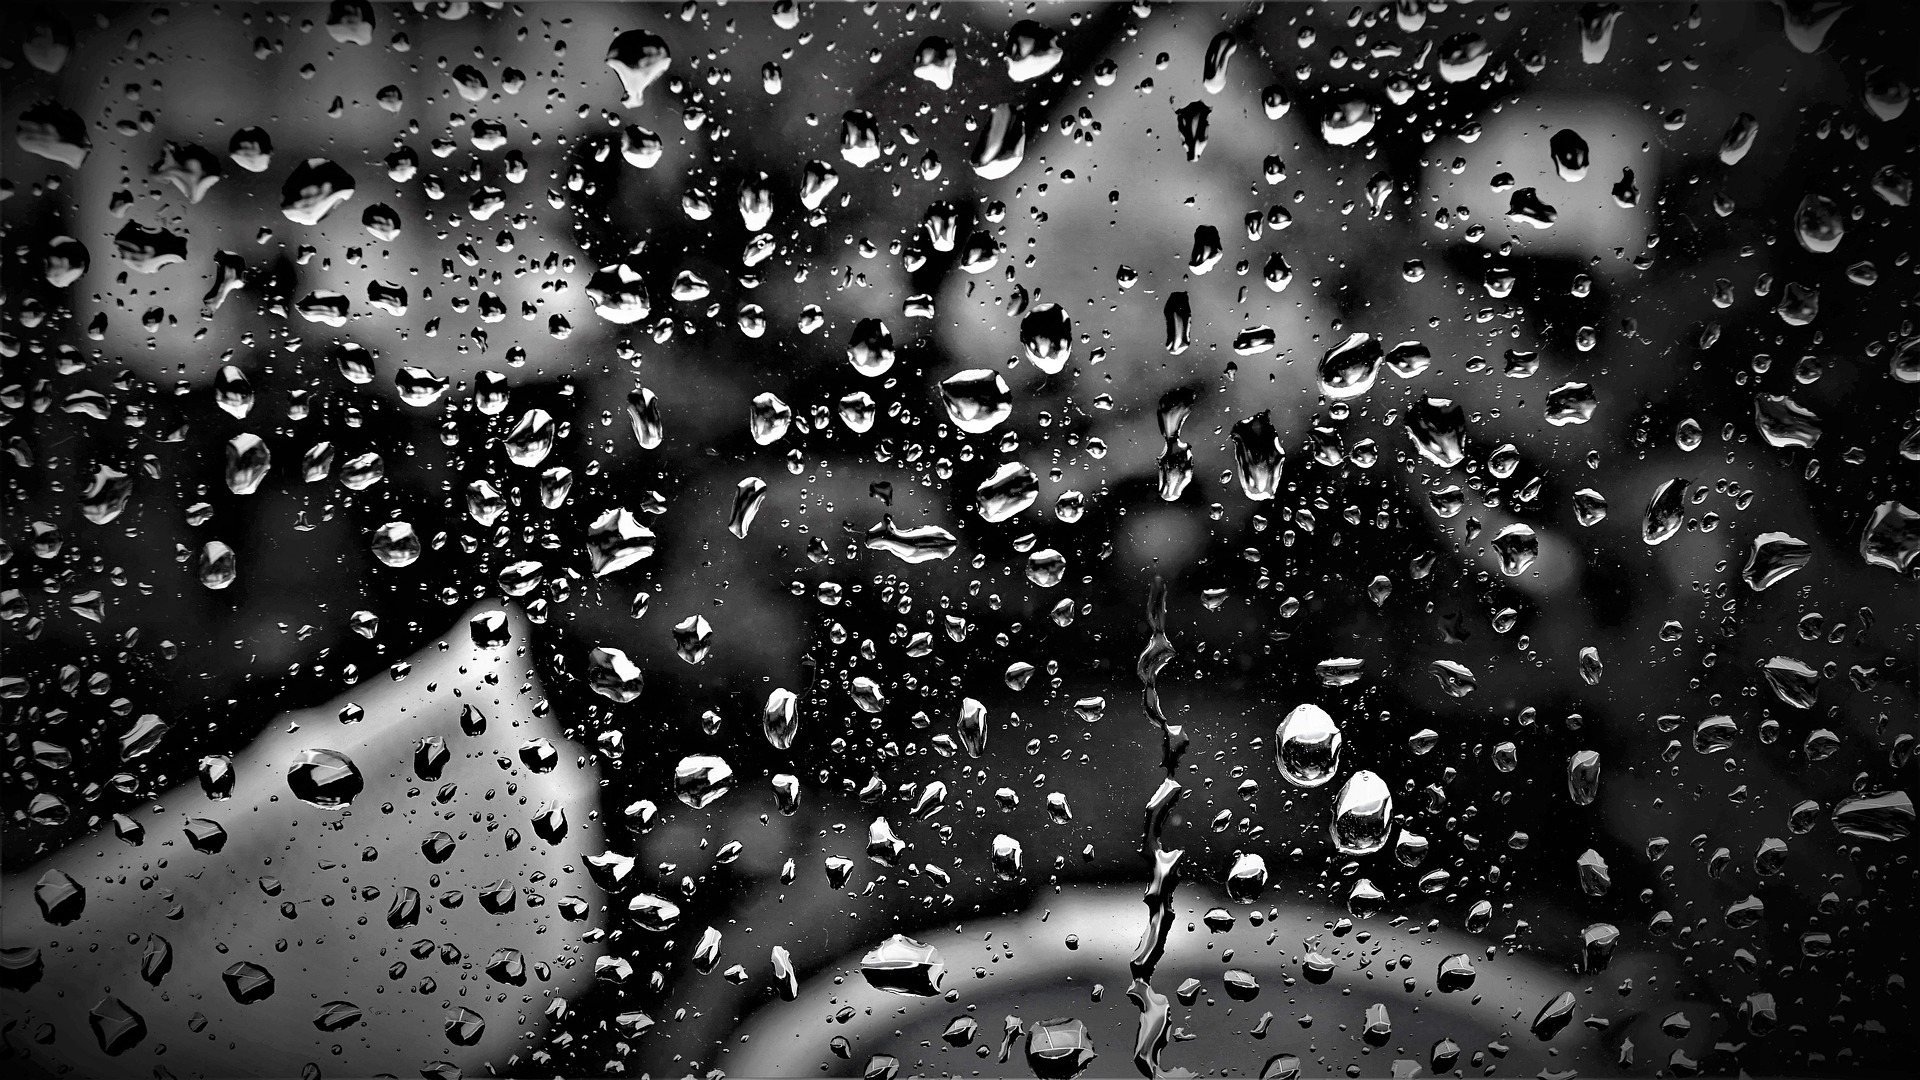 Mobile wallpaper: Photography, Raindrops, Water Drop, 981401 download the  picture for free.